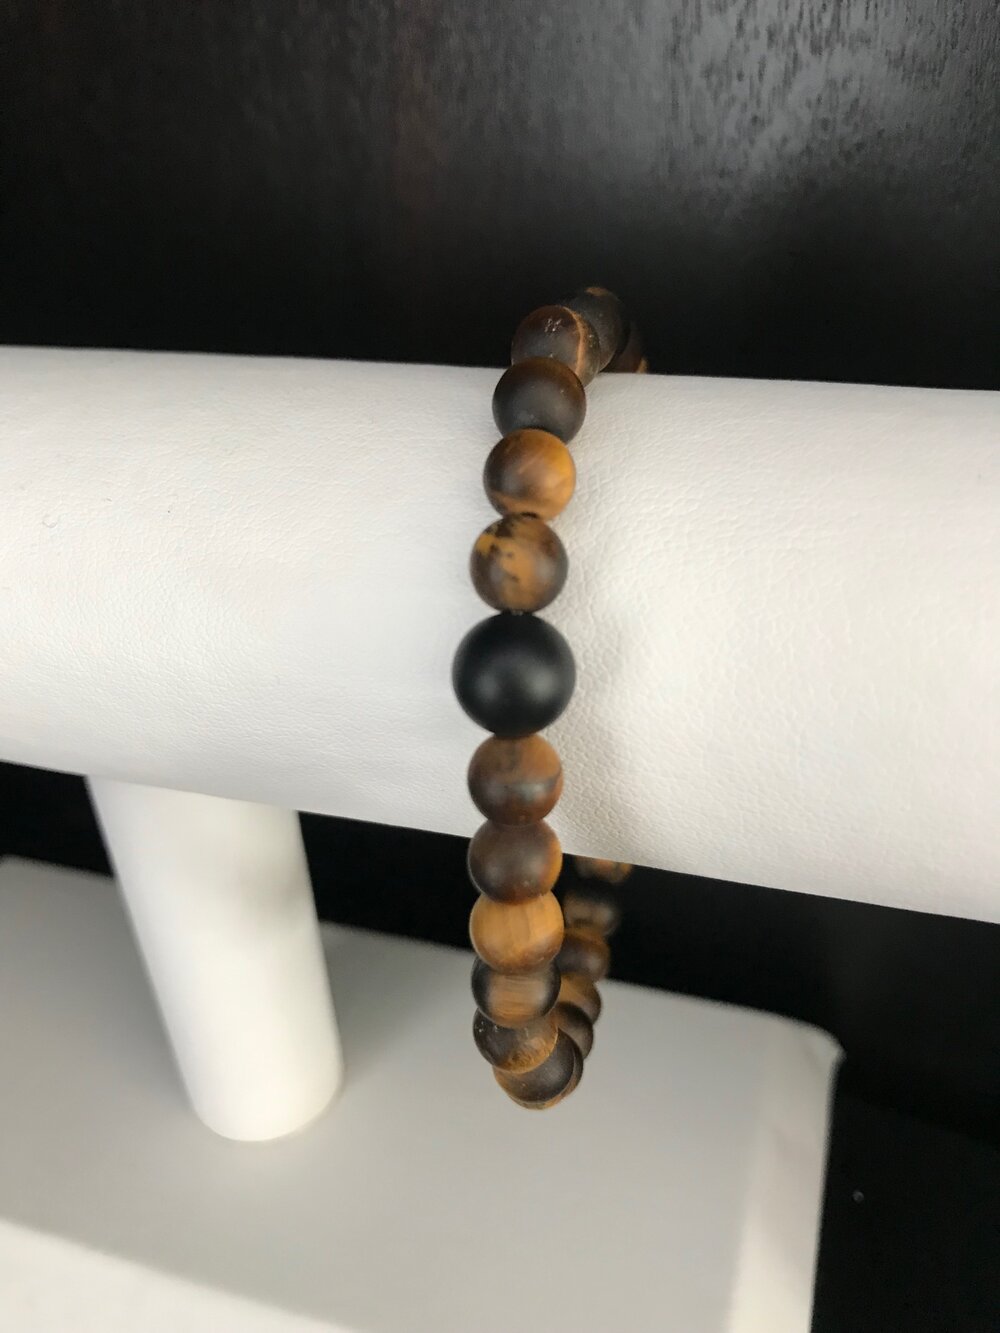 Tiger Eye Beaded Bracelet with Silver Spacer Beads